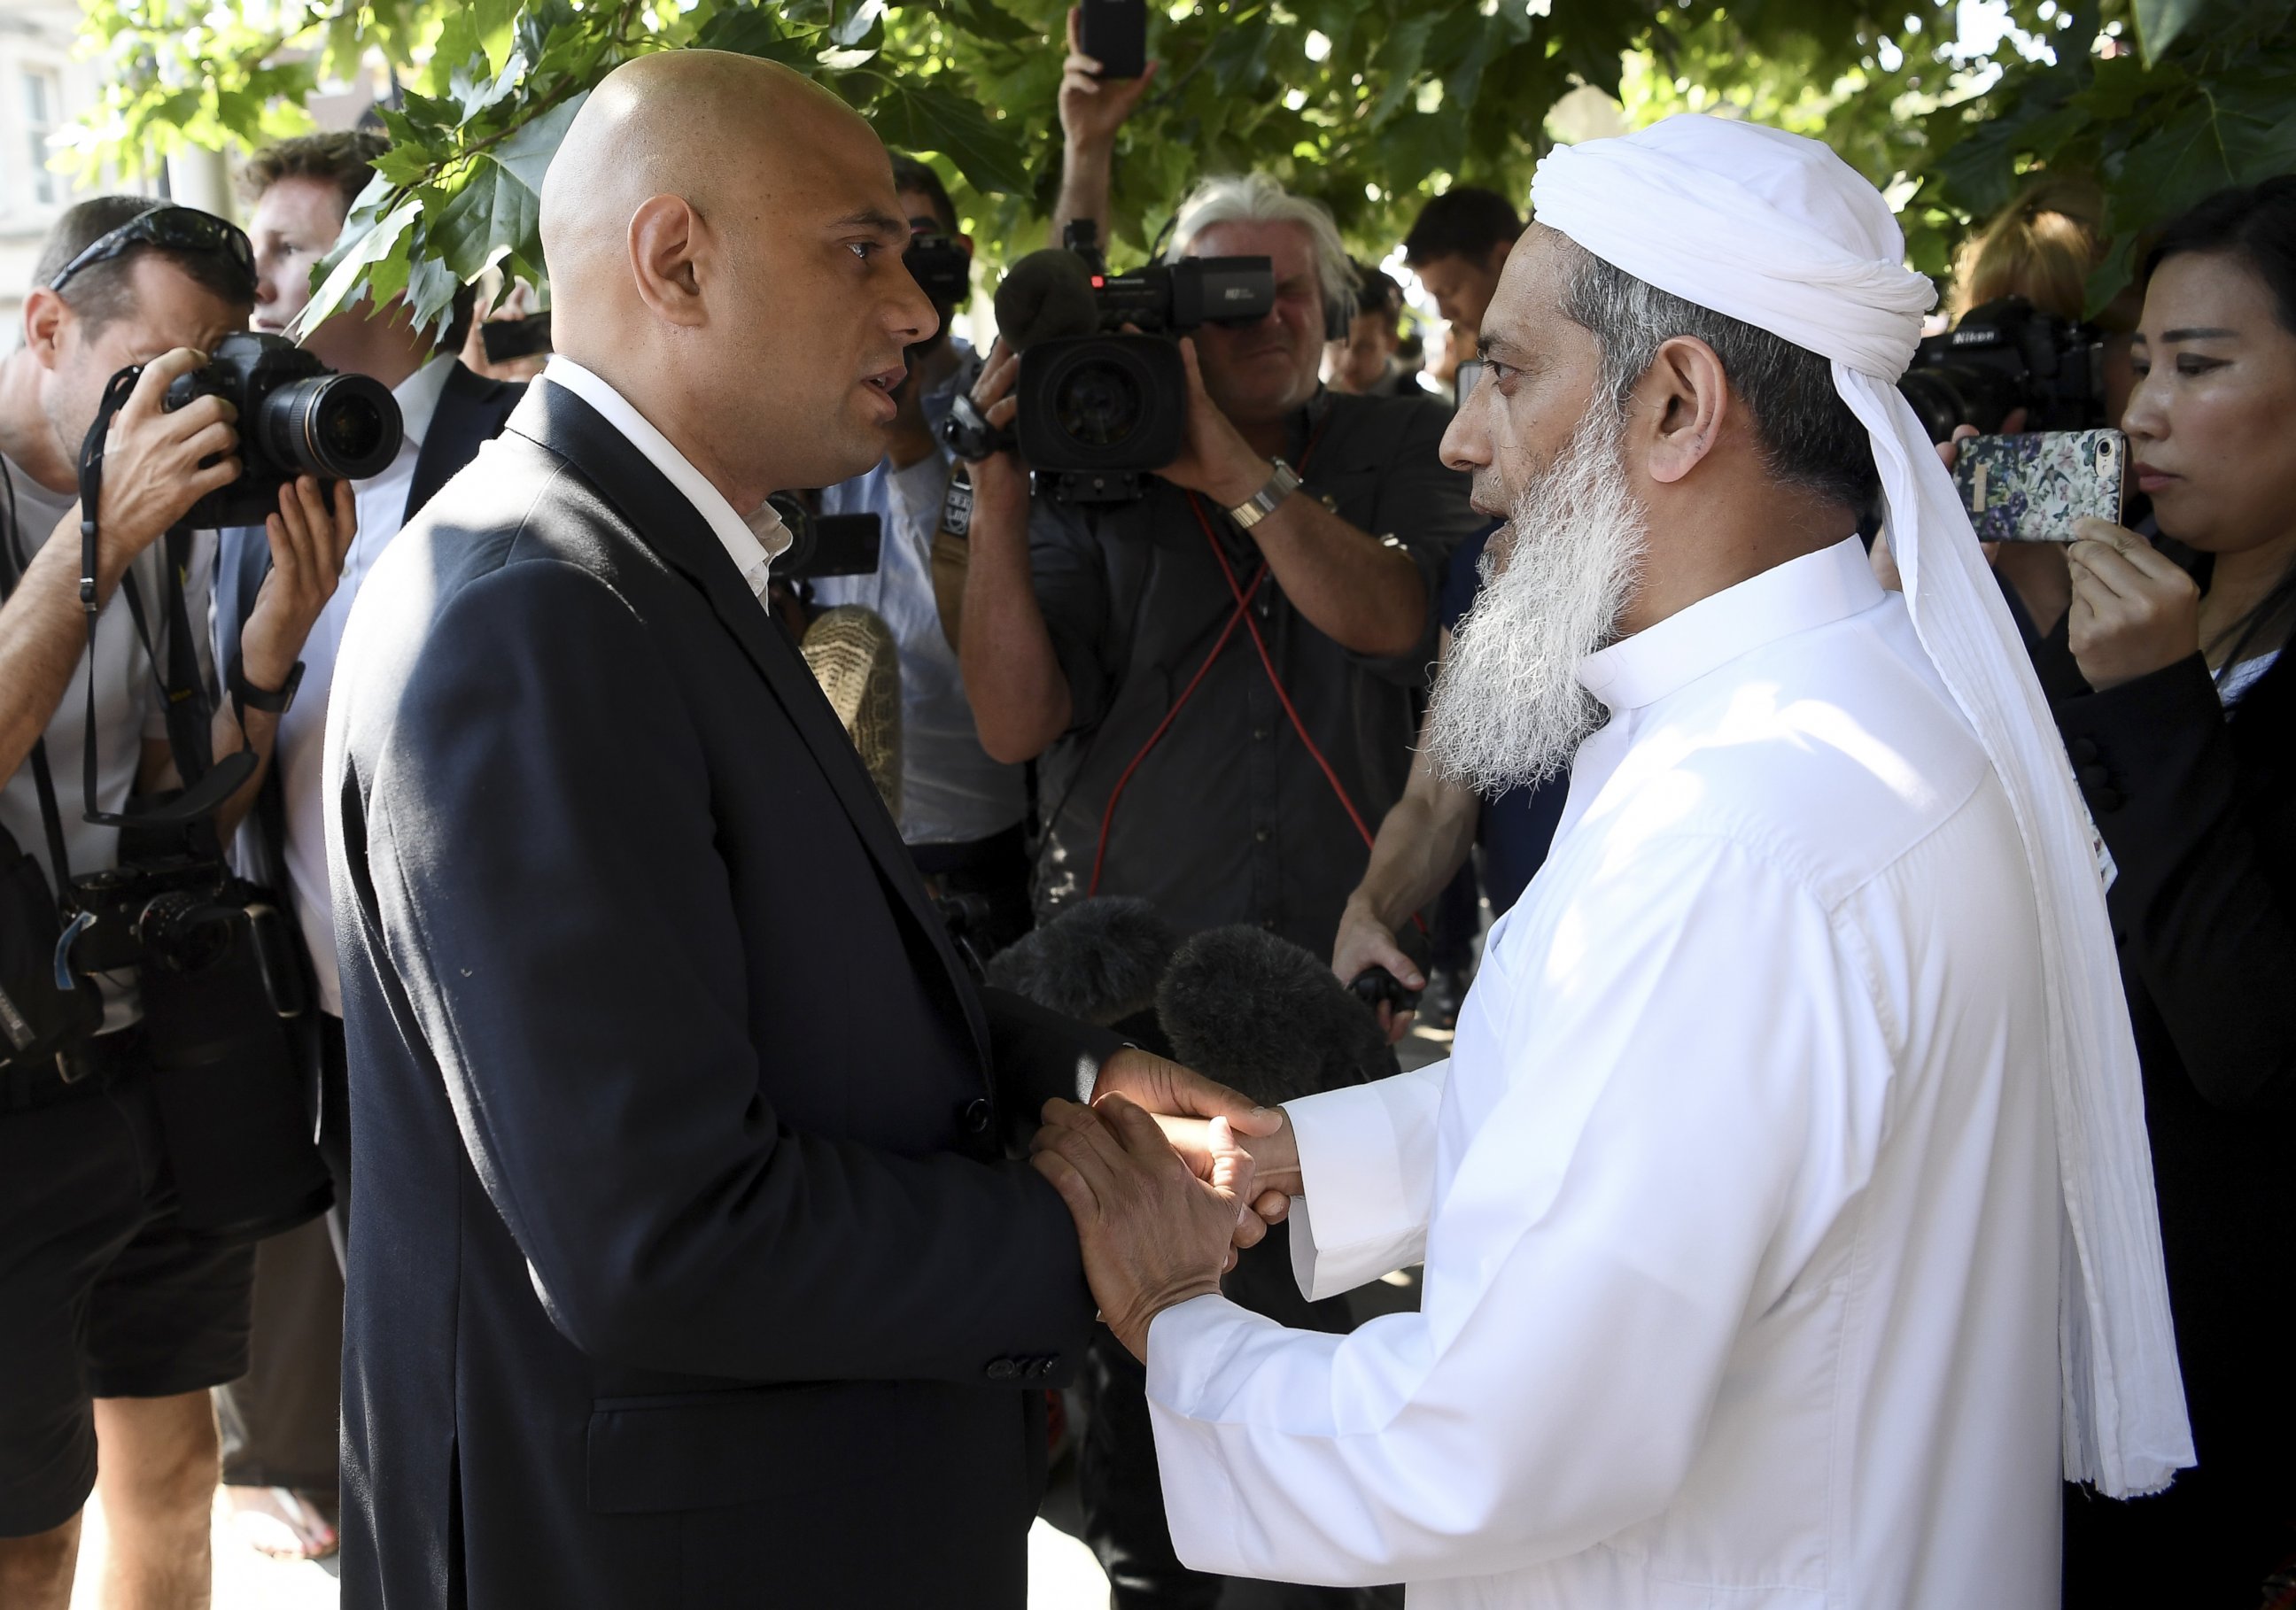 PHOTO: Secretary of State for Communities and Local Government Sajid Javid (L) speaks to an Imam at the scene of a terror attack in Finsbury Park, June 19, 2017, in London.